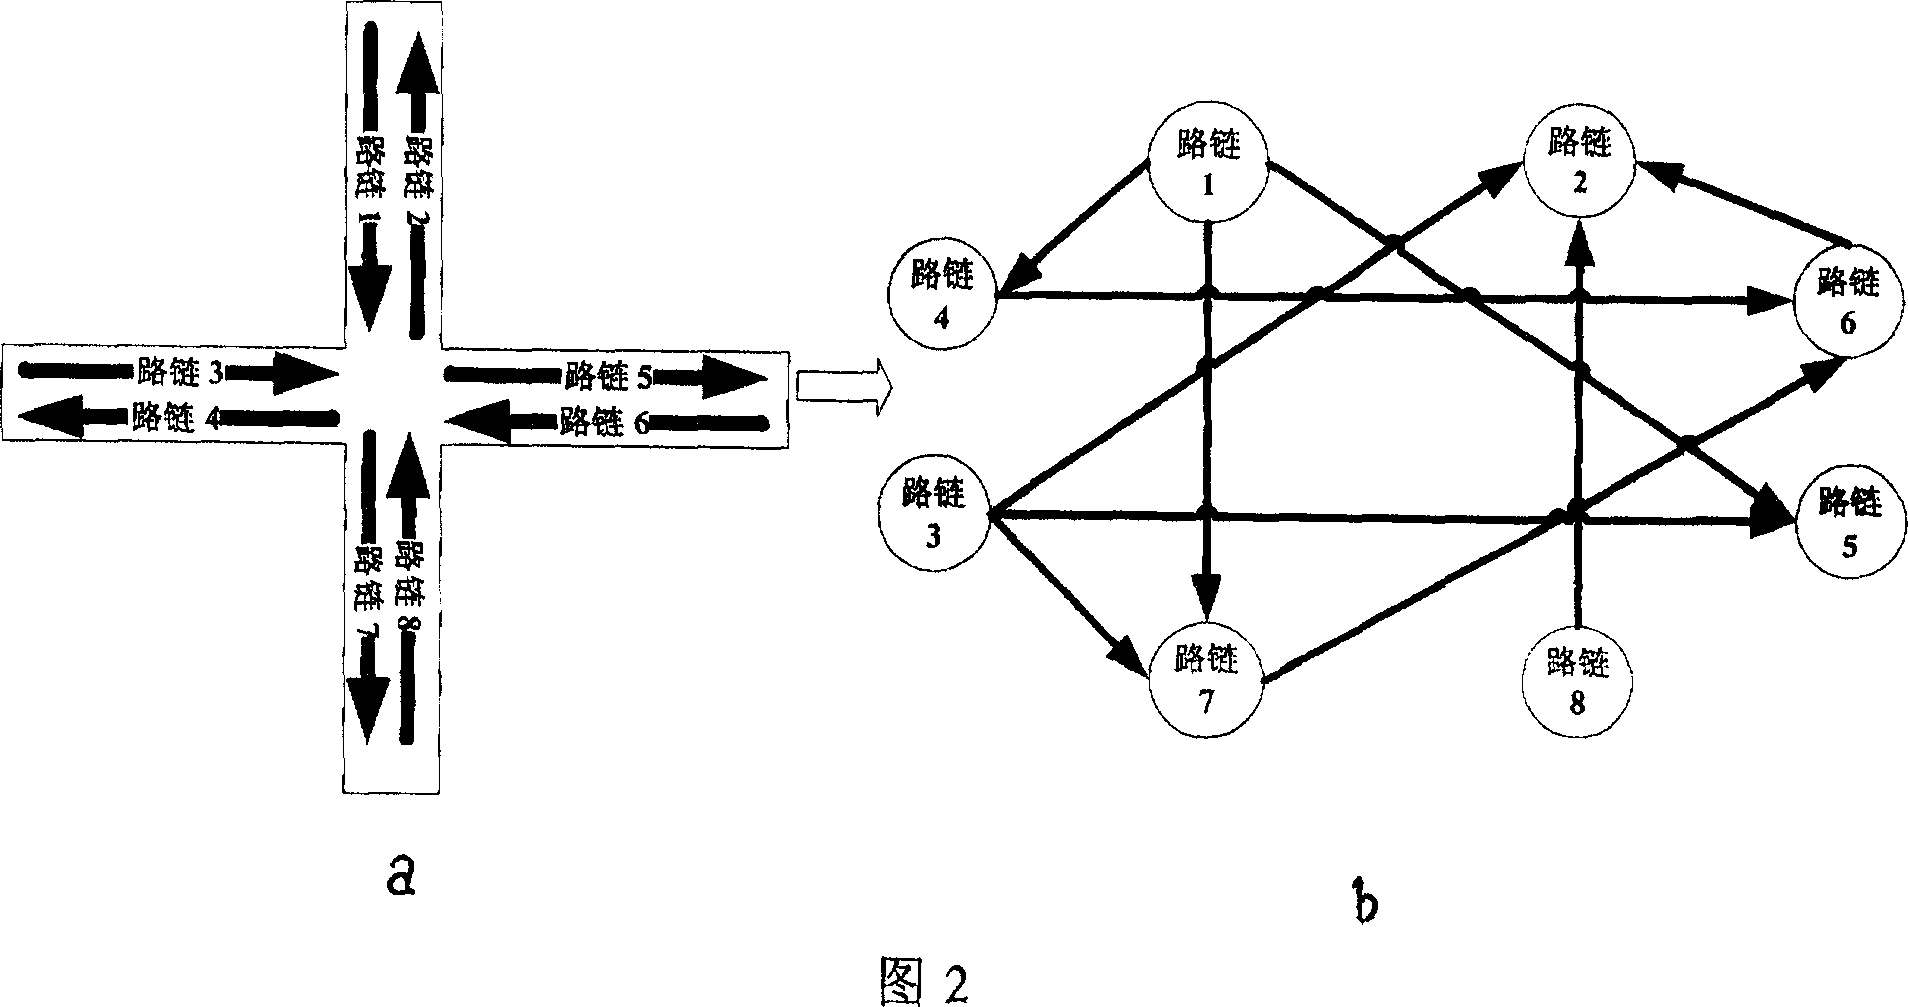 Heuristic path culculating method for treating large scale floating vehicle data